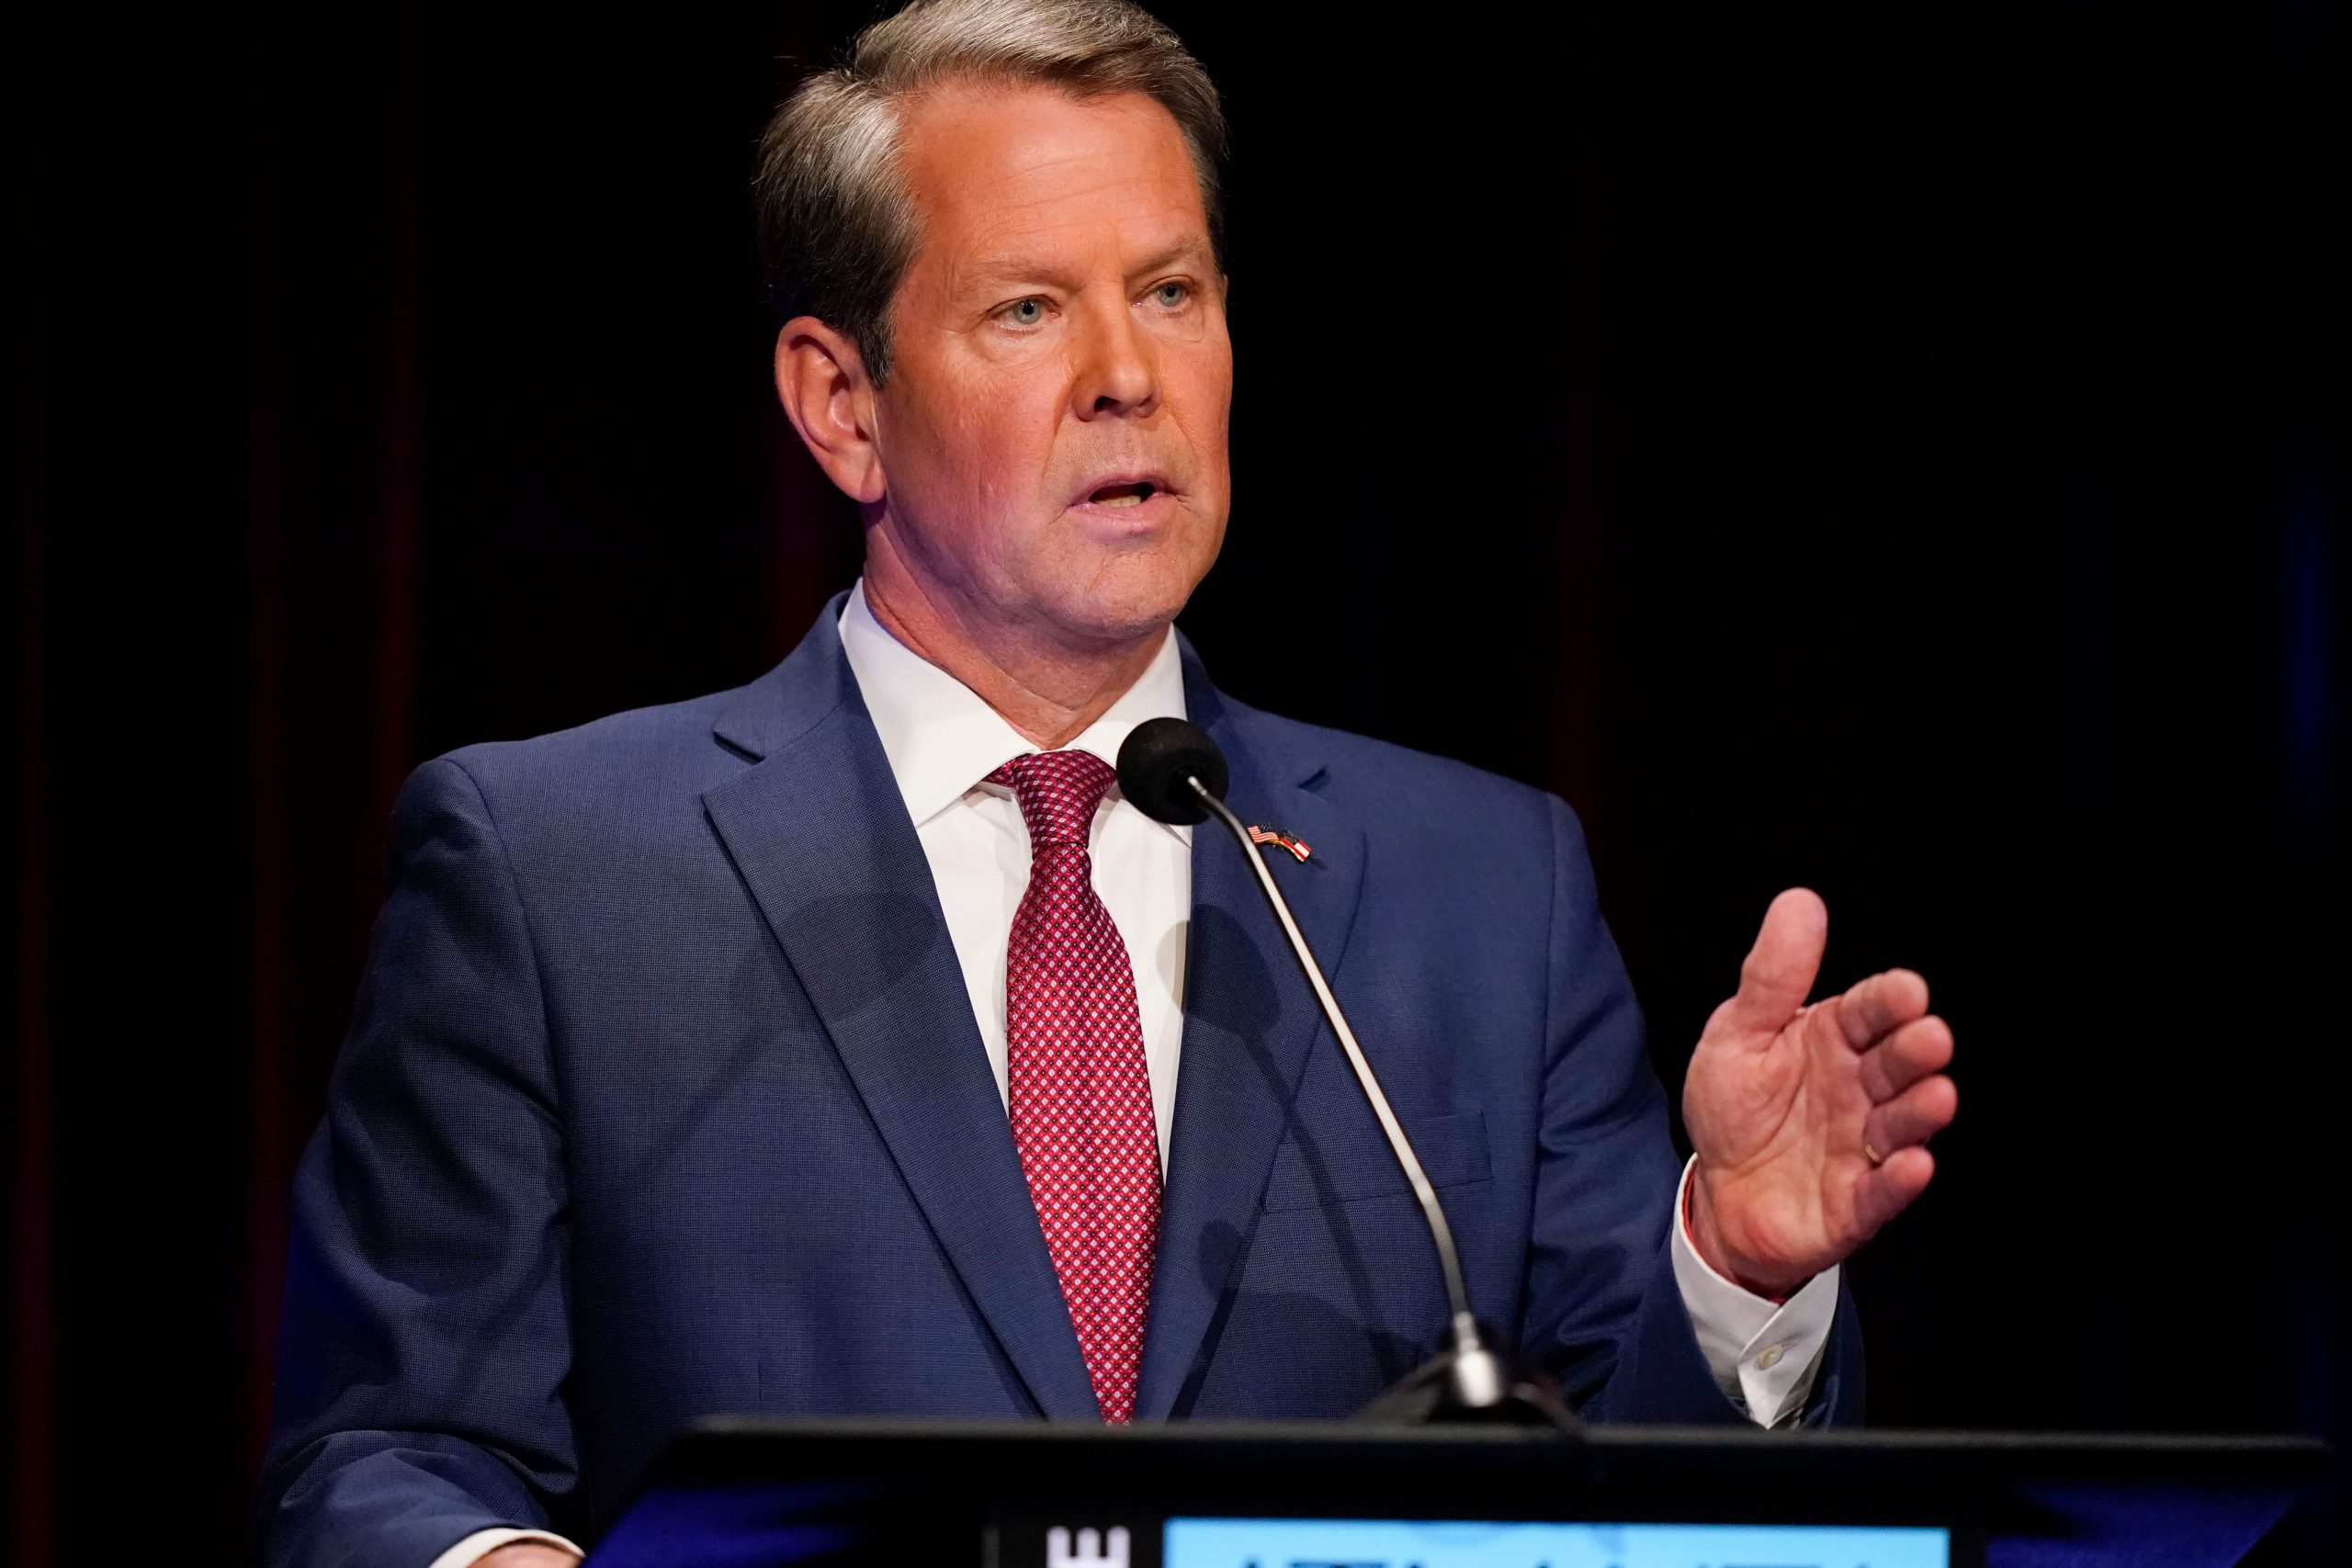 Who is Brian Kemp?